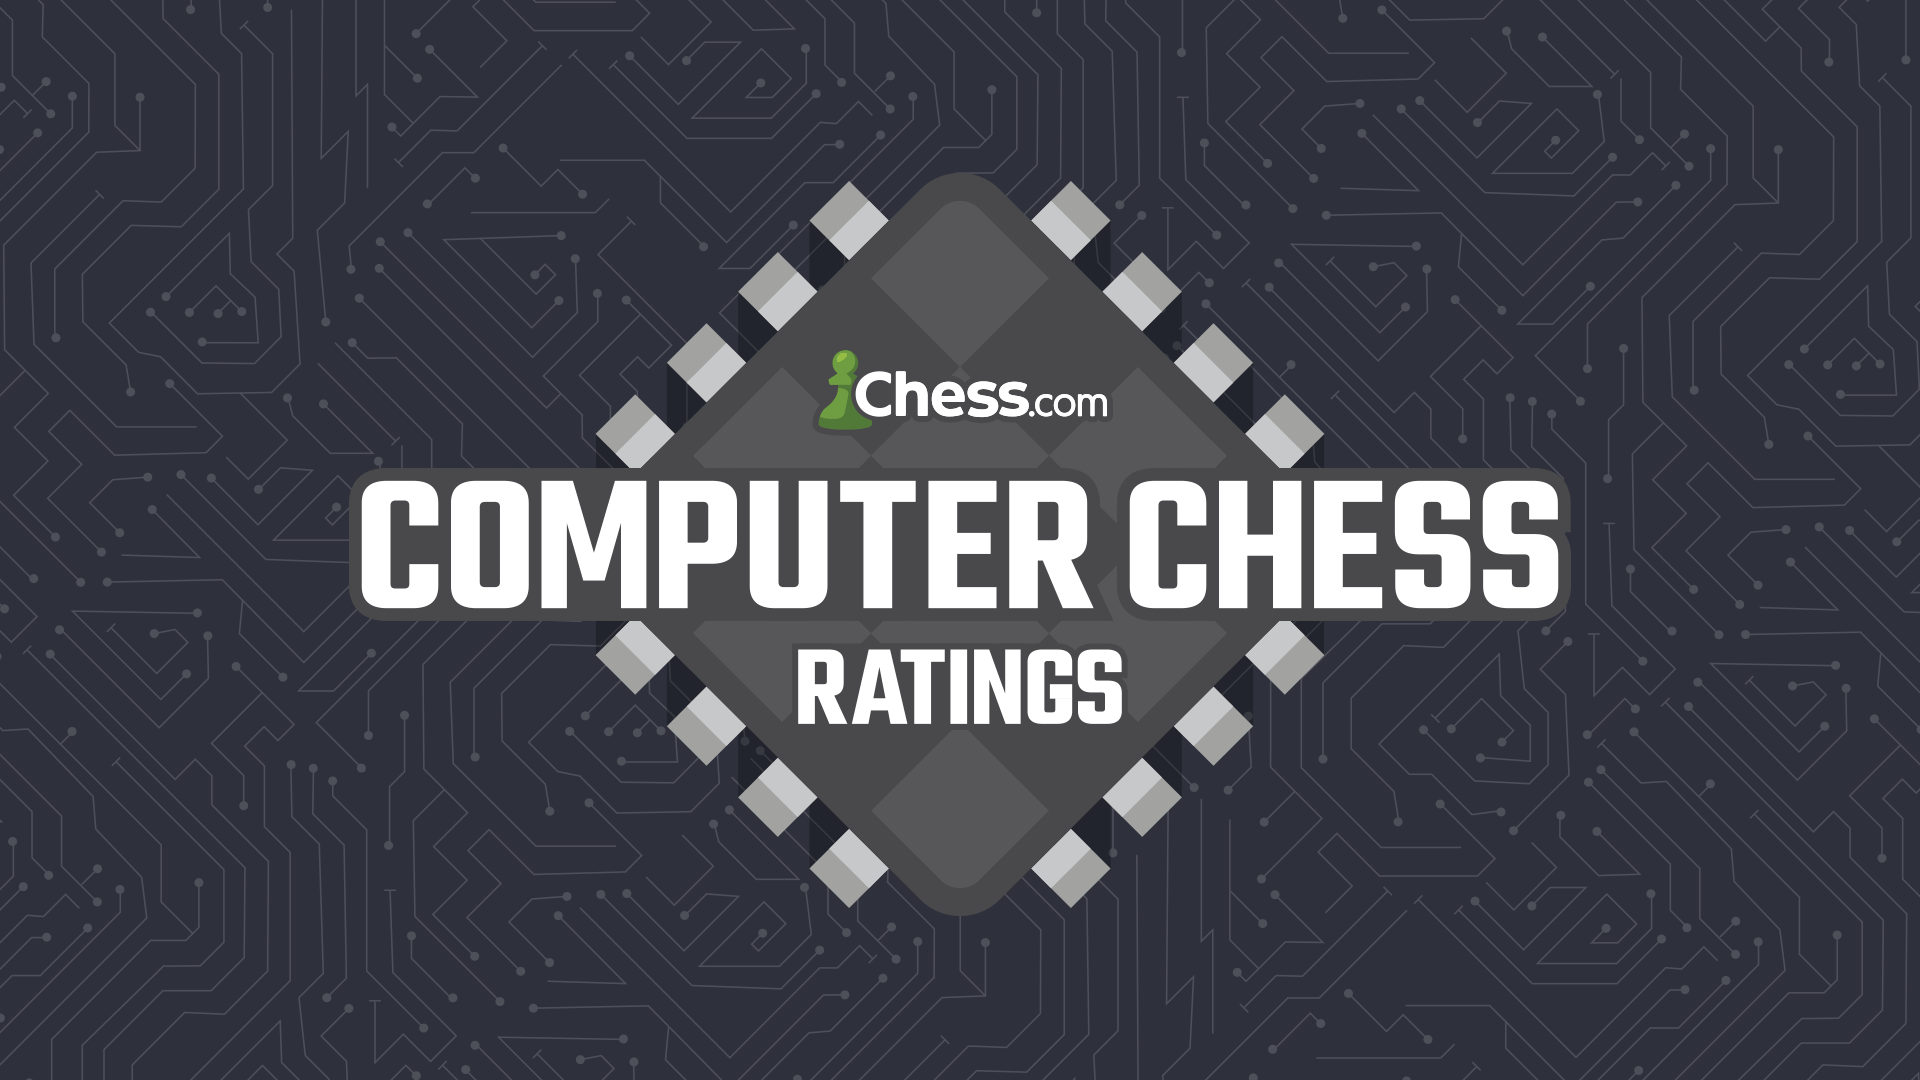 31 Best Chess Engines of 2023  Based On Their Ratings - RankRed